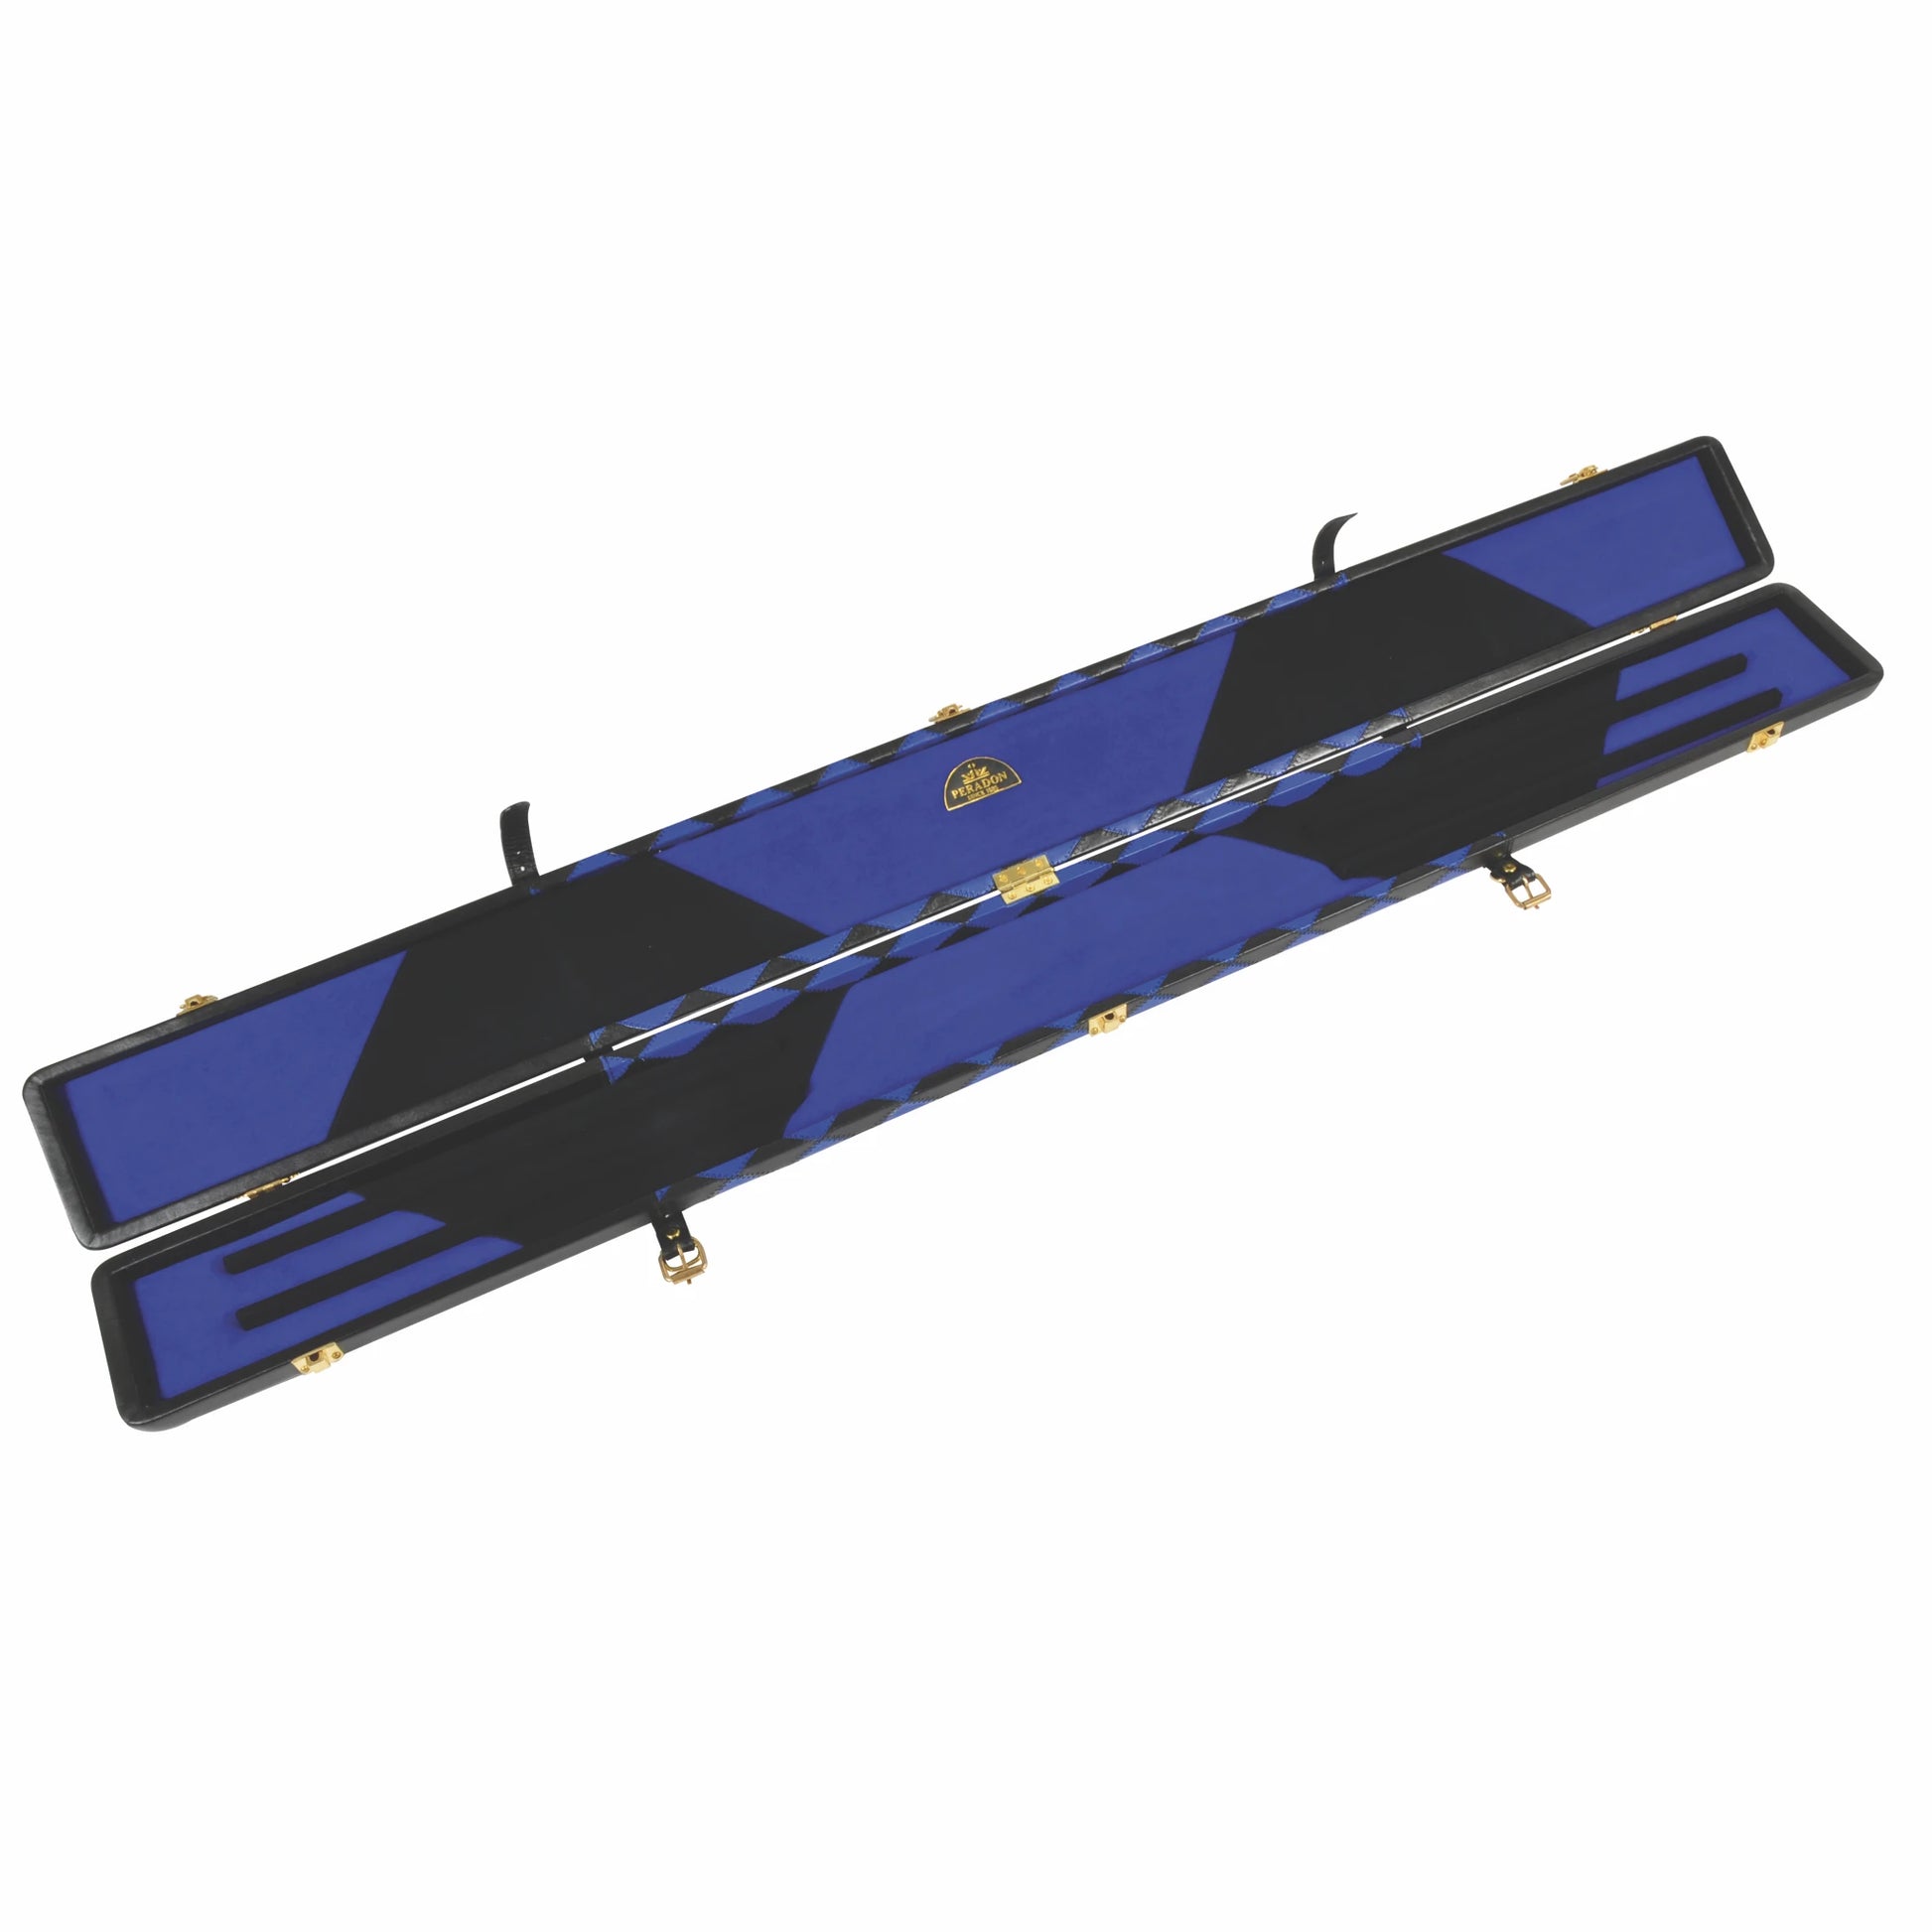 Peradon Leather Black Royal Blue Small Diamonds Snooker Cue Case for 3/4 Jointed Cues